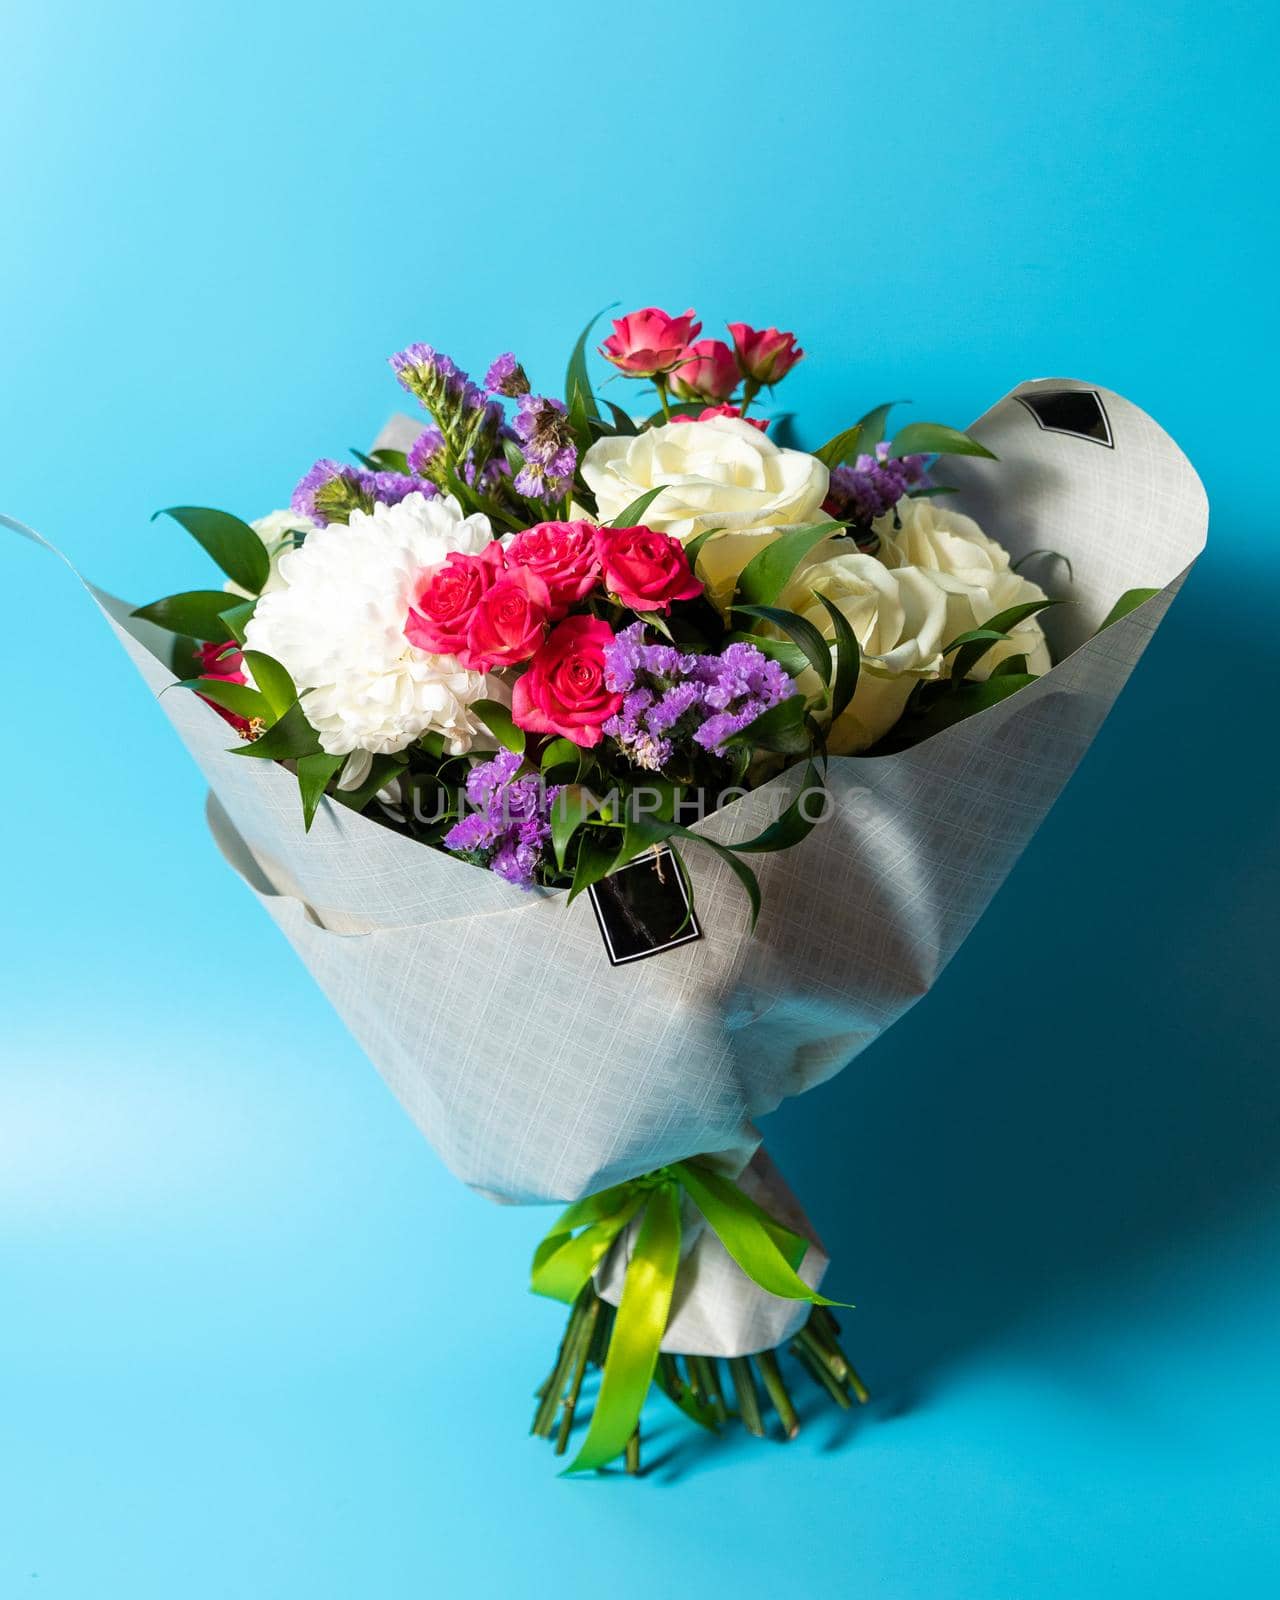 Flower bouquet with blue background by ferhad